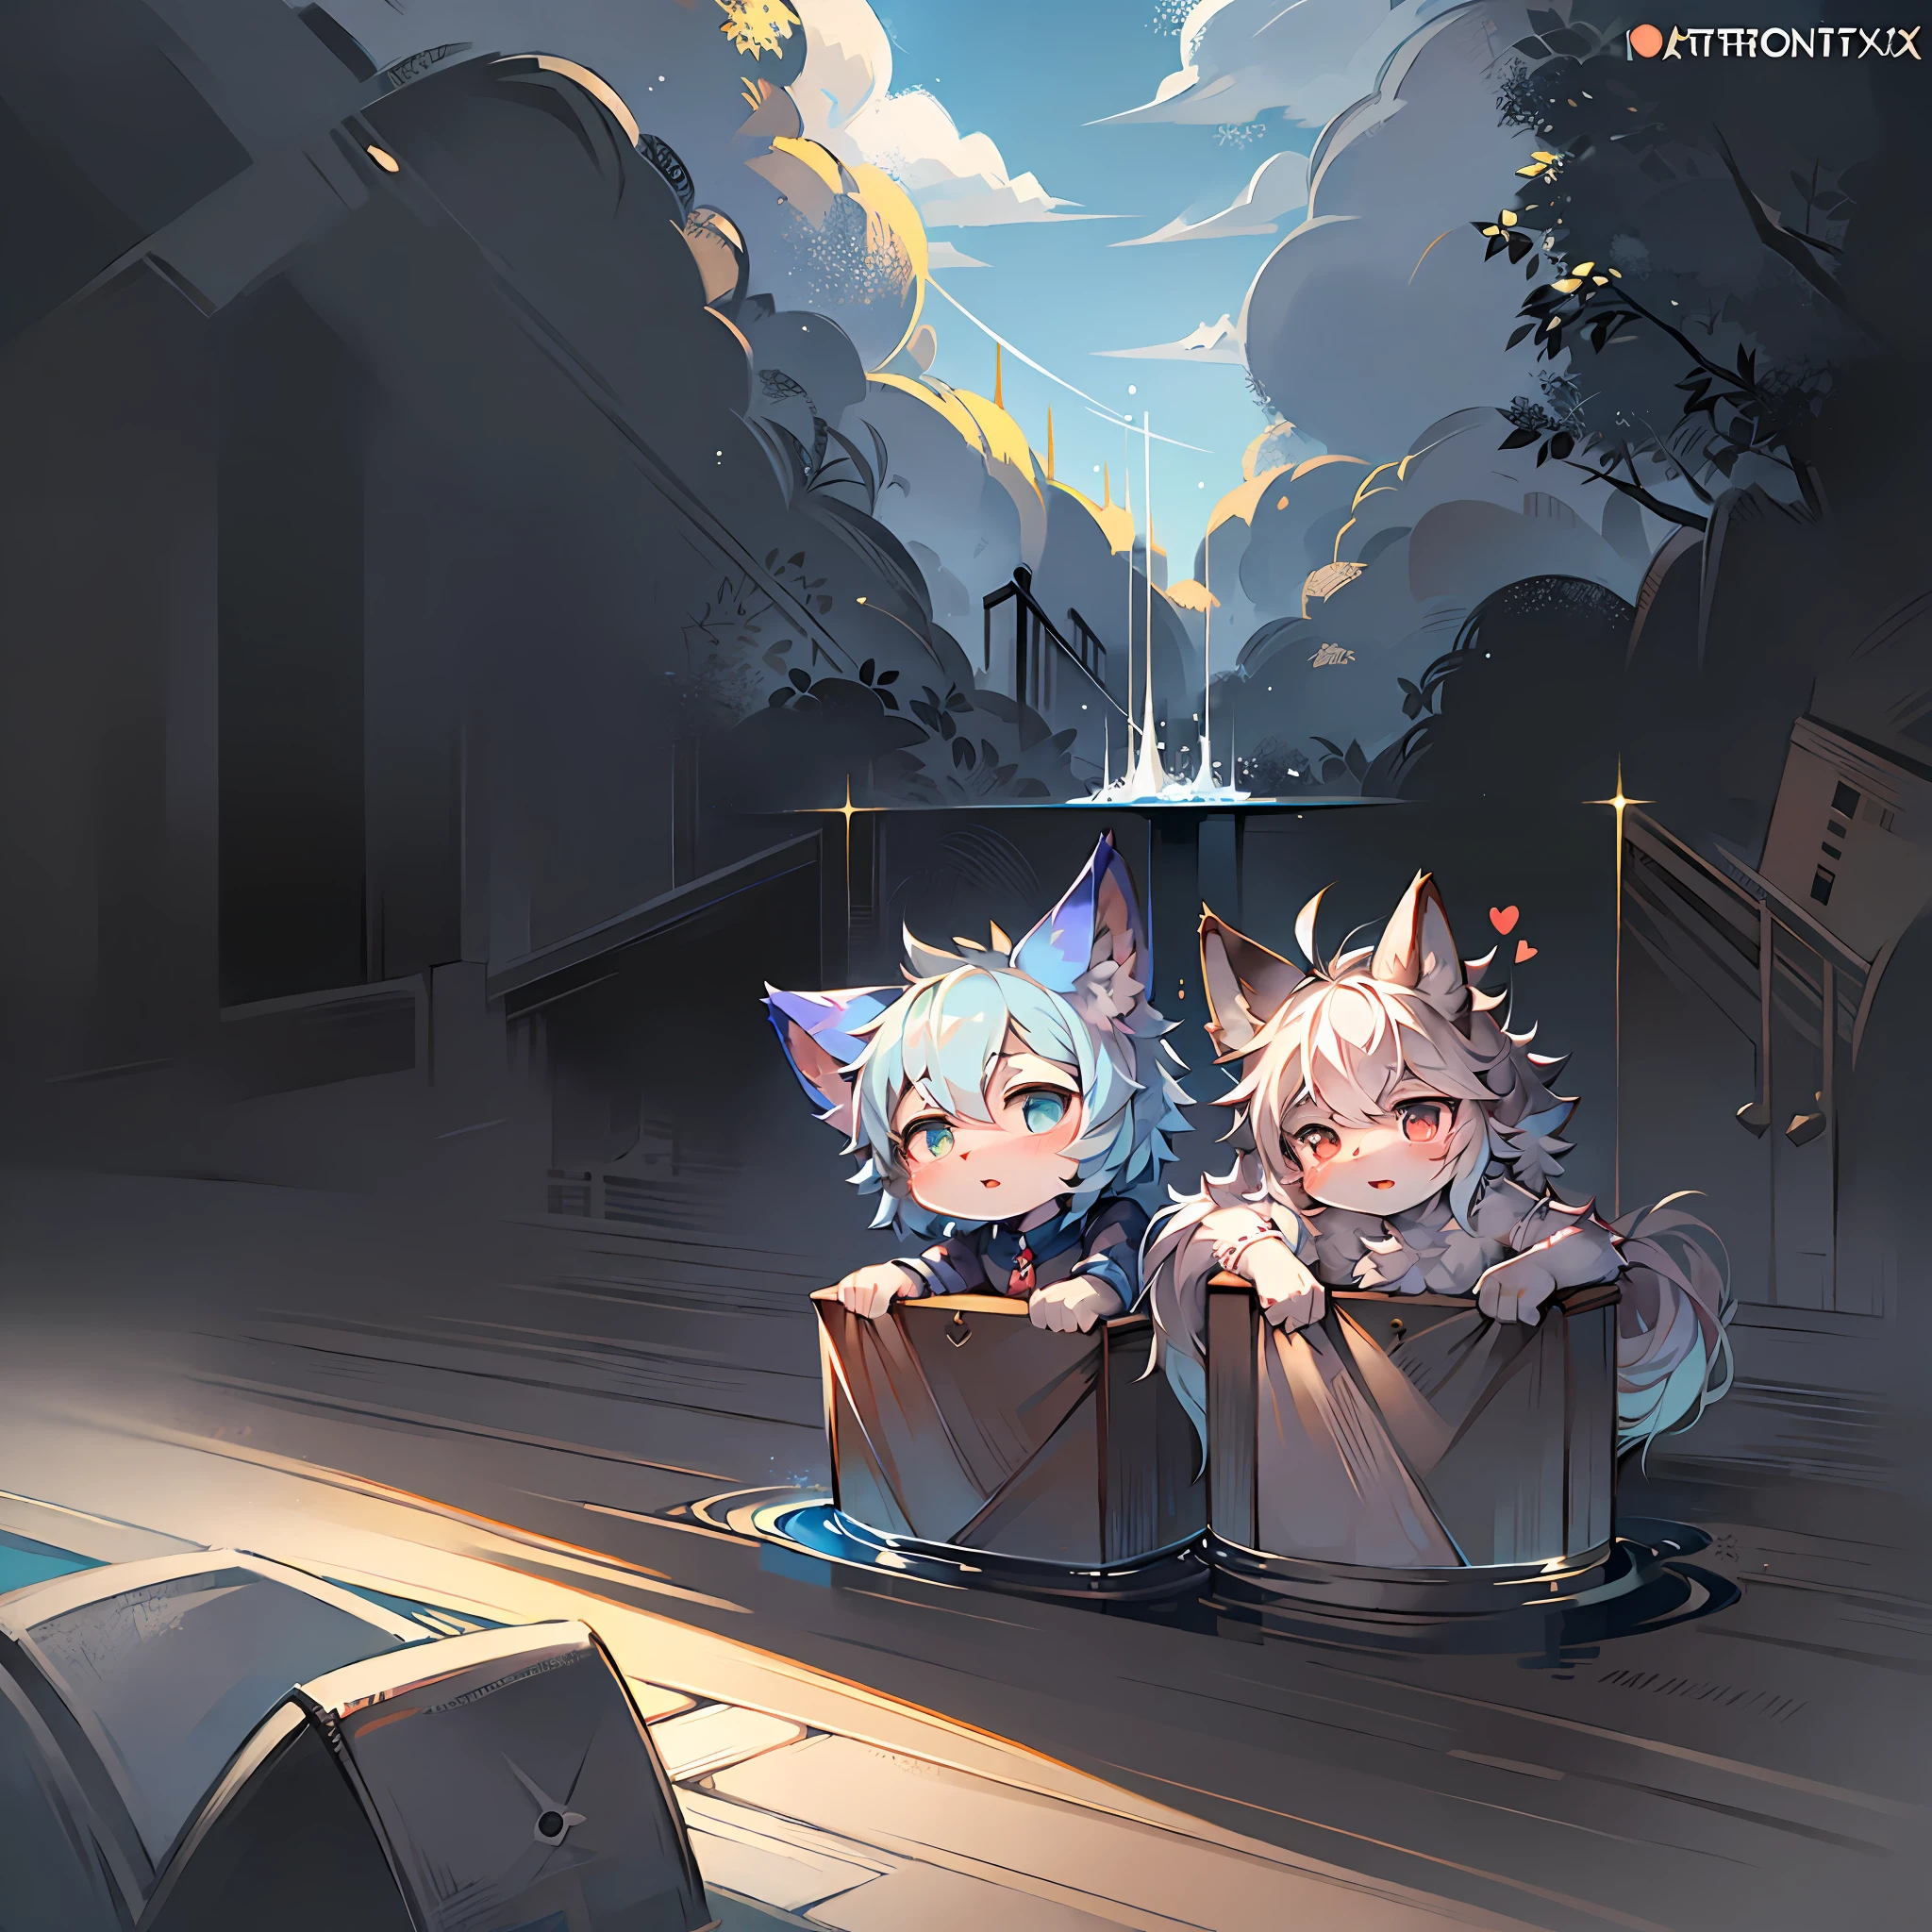 Anime Cats in the water，anime visual of a cute cat, Guviz, neferpitou, author：Shitao, Pisif, trending on artstation pixiv, Guweiz in Pixiv ArtStation, Soft anime illustration, at pixiv, Highest rated on Pisif, wallpaper anime blue water，hairy pubic。